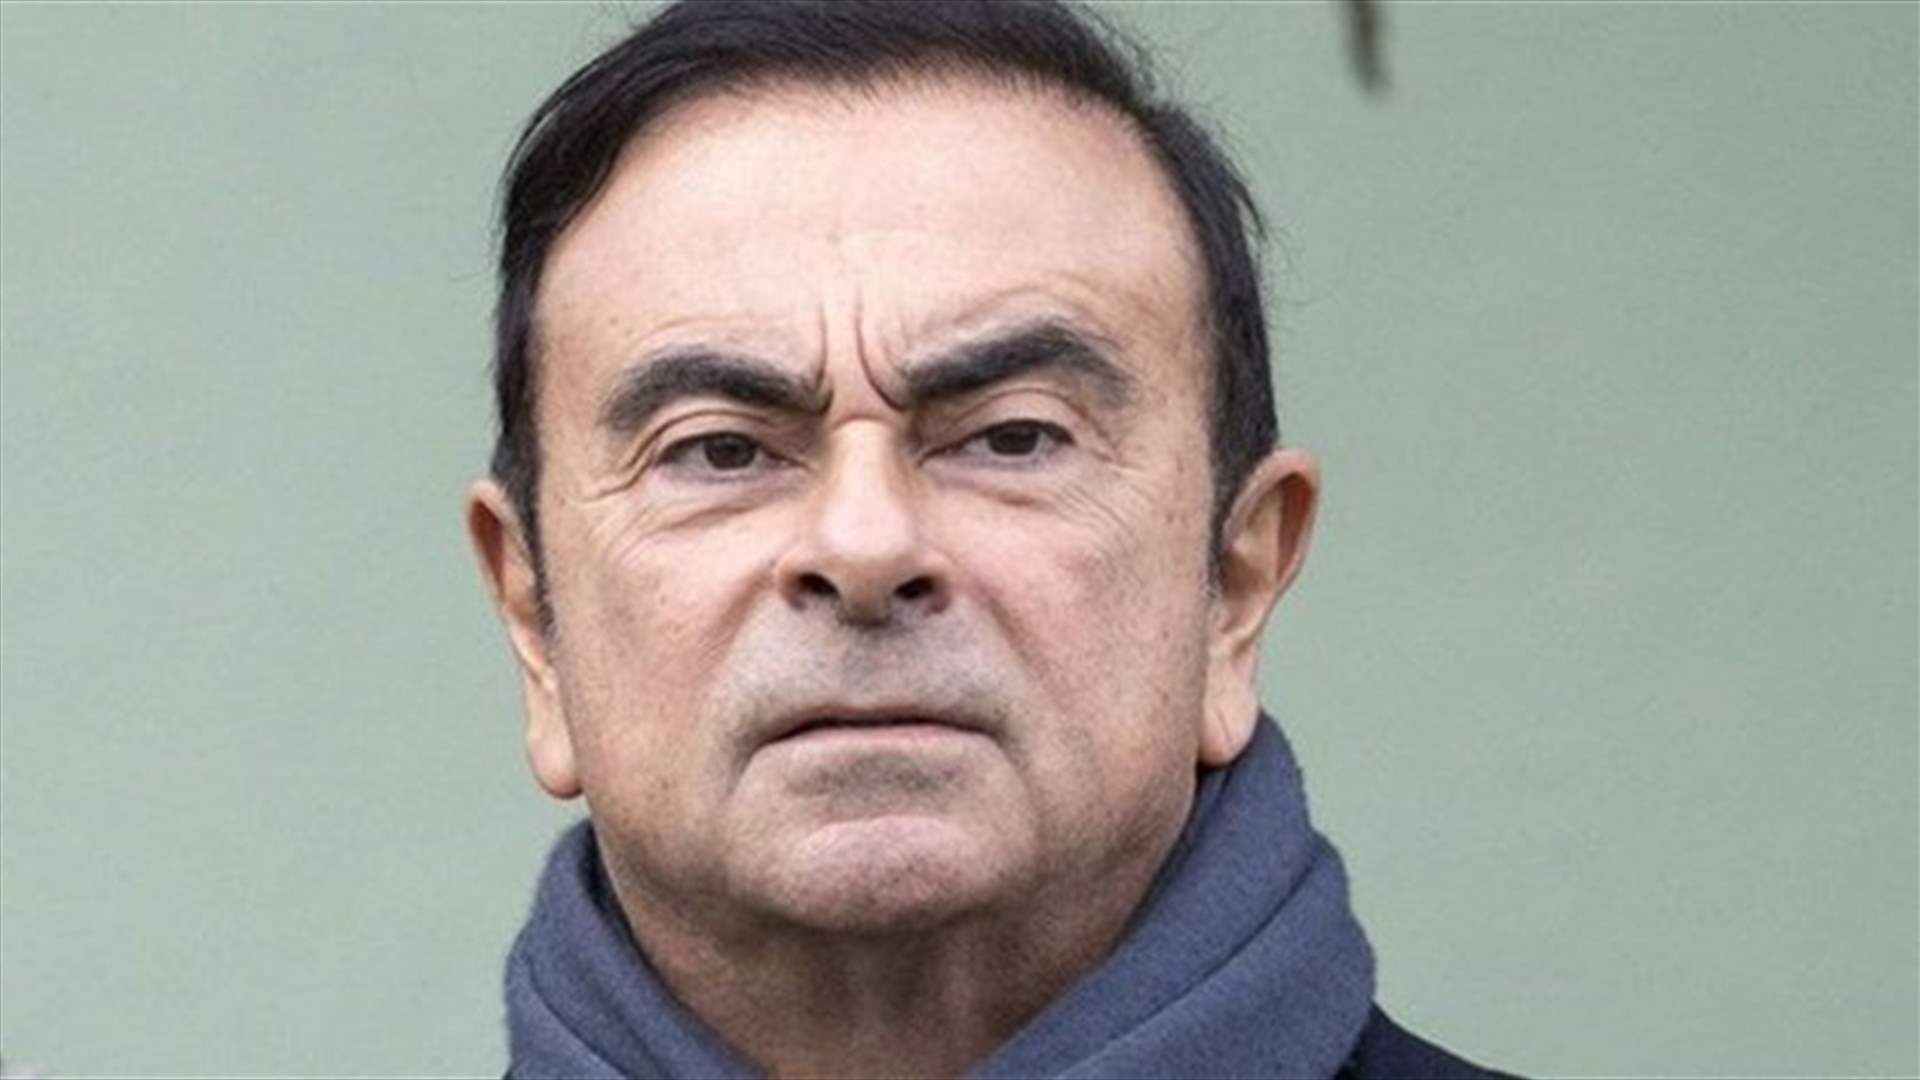 Ghosn received $9 mln improperly from Nissan-Mitsubishi JV -companies